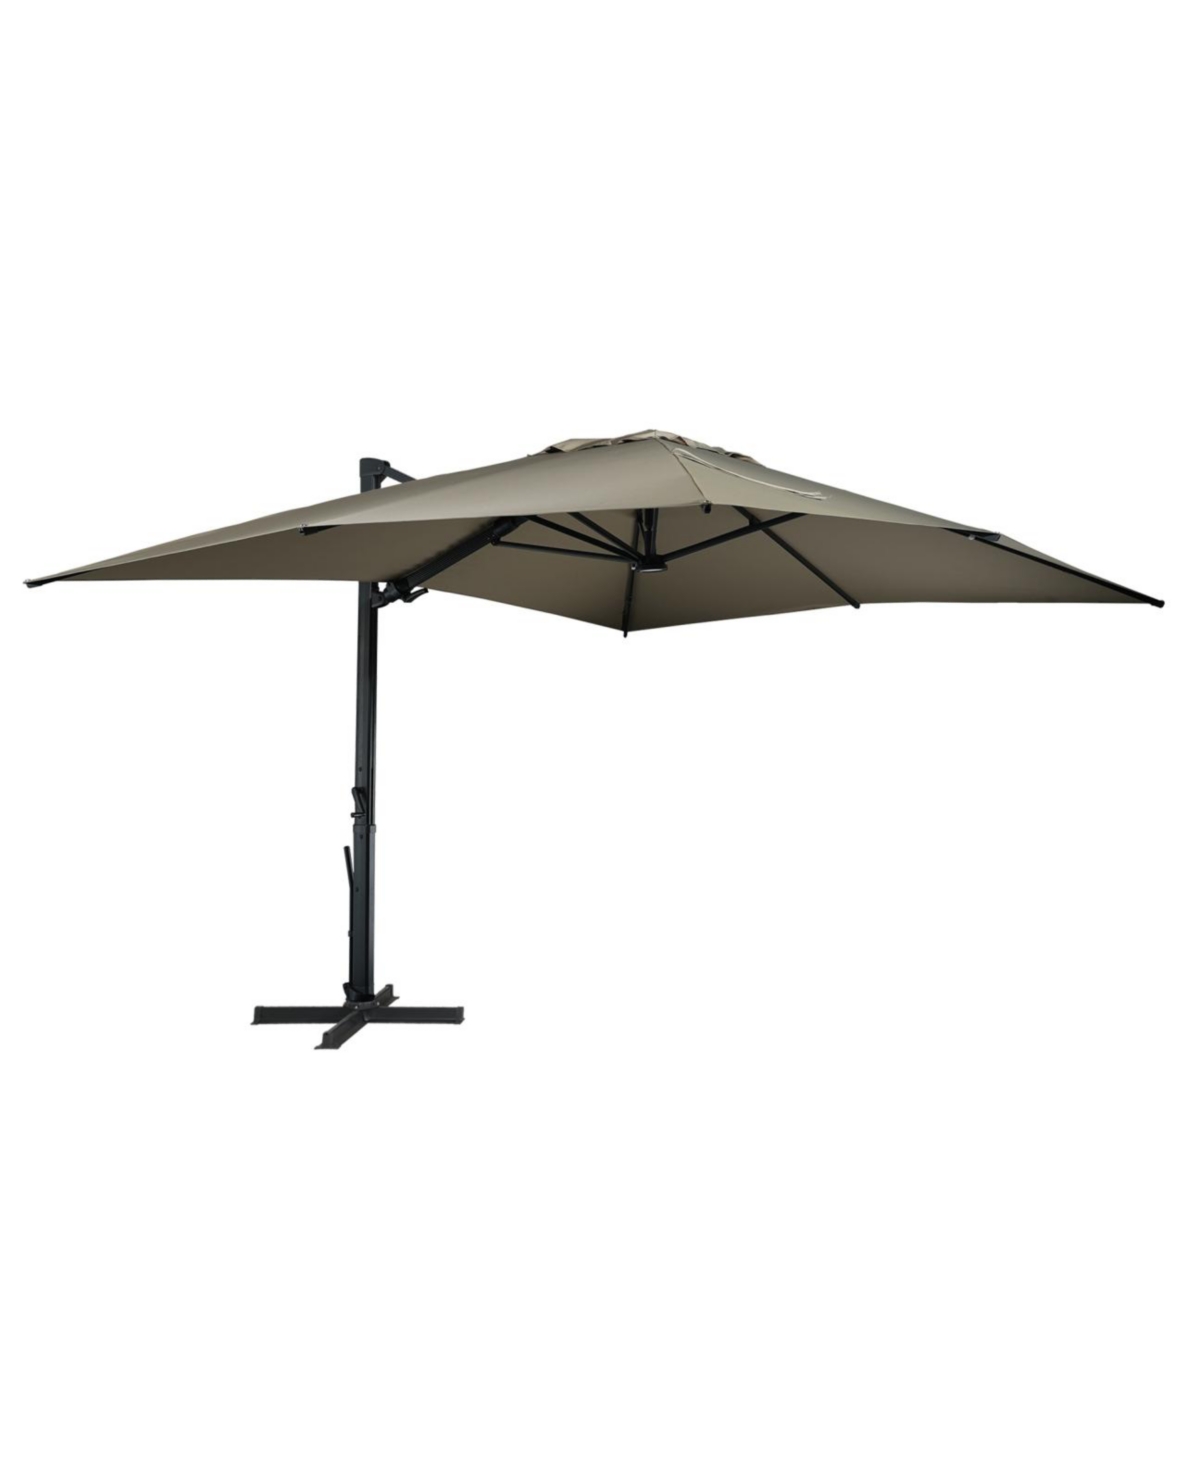 13ft Square Solor Led Cantilever Patio Umbrella for Outdoor Shade - Gray